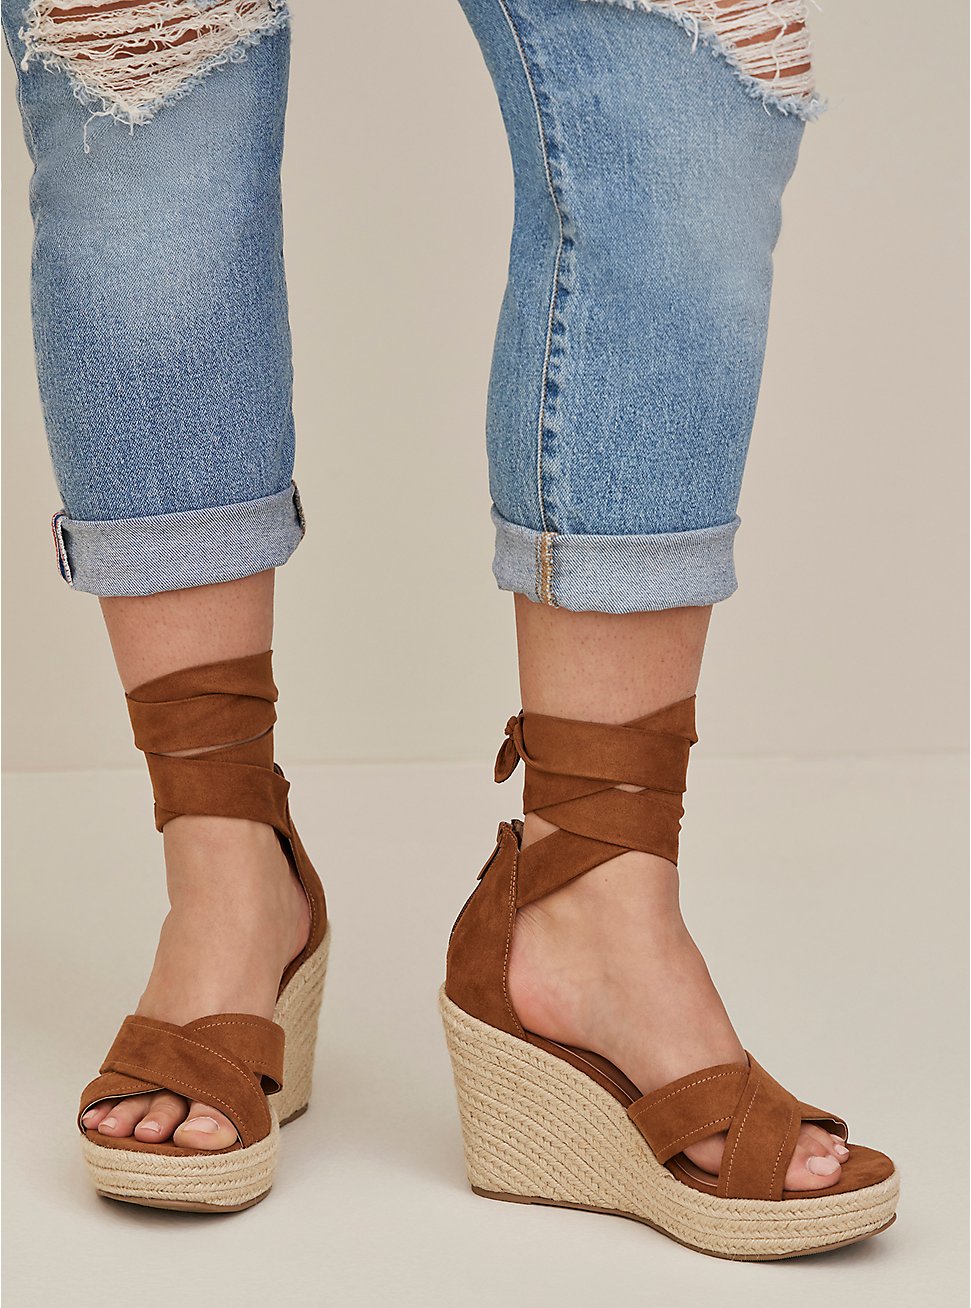 Lace-Up Espadrille Wedge - Brown (WW), BROWN, hi-res